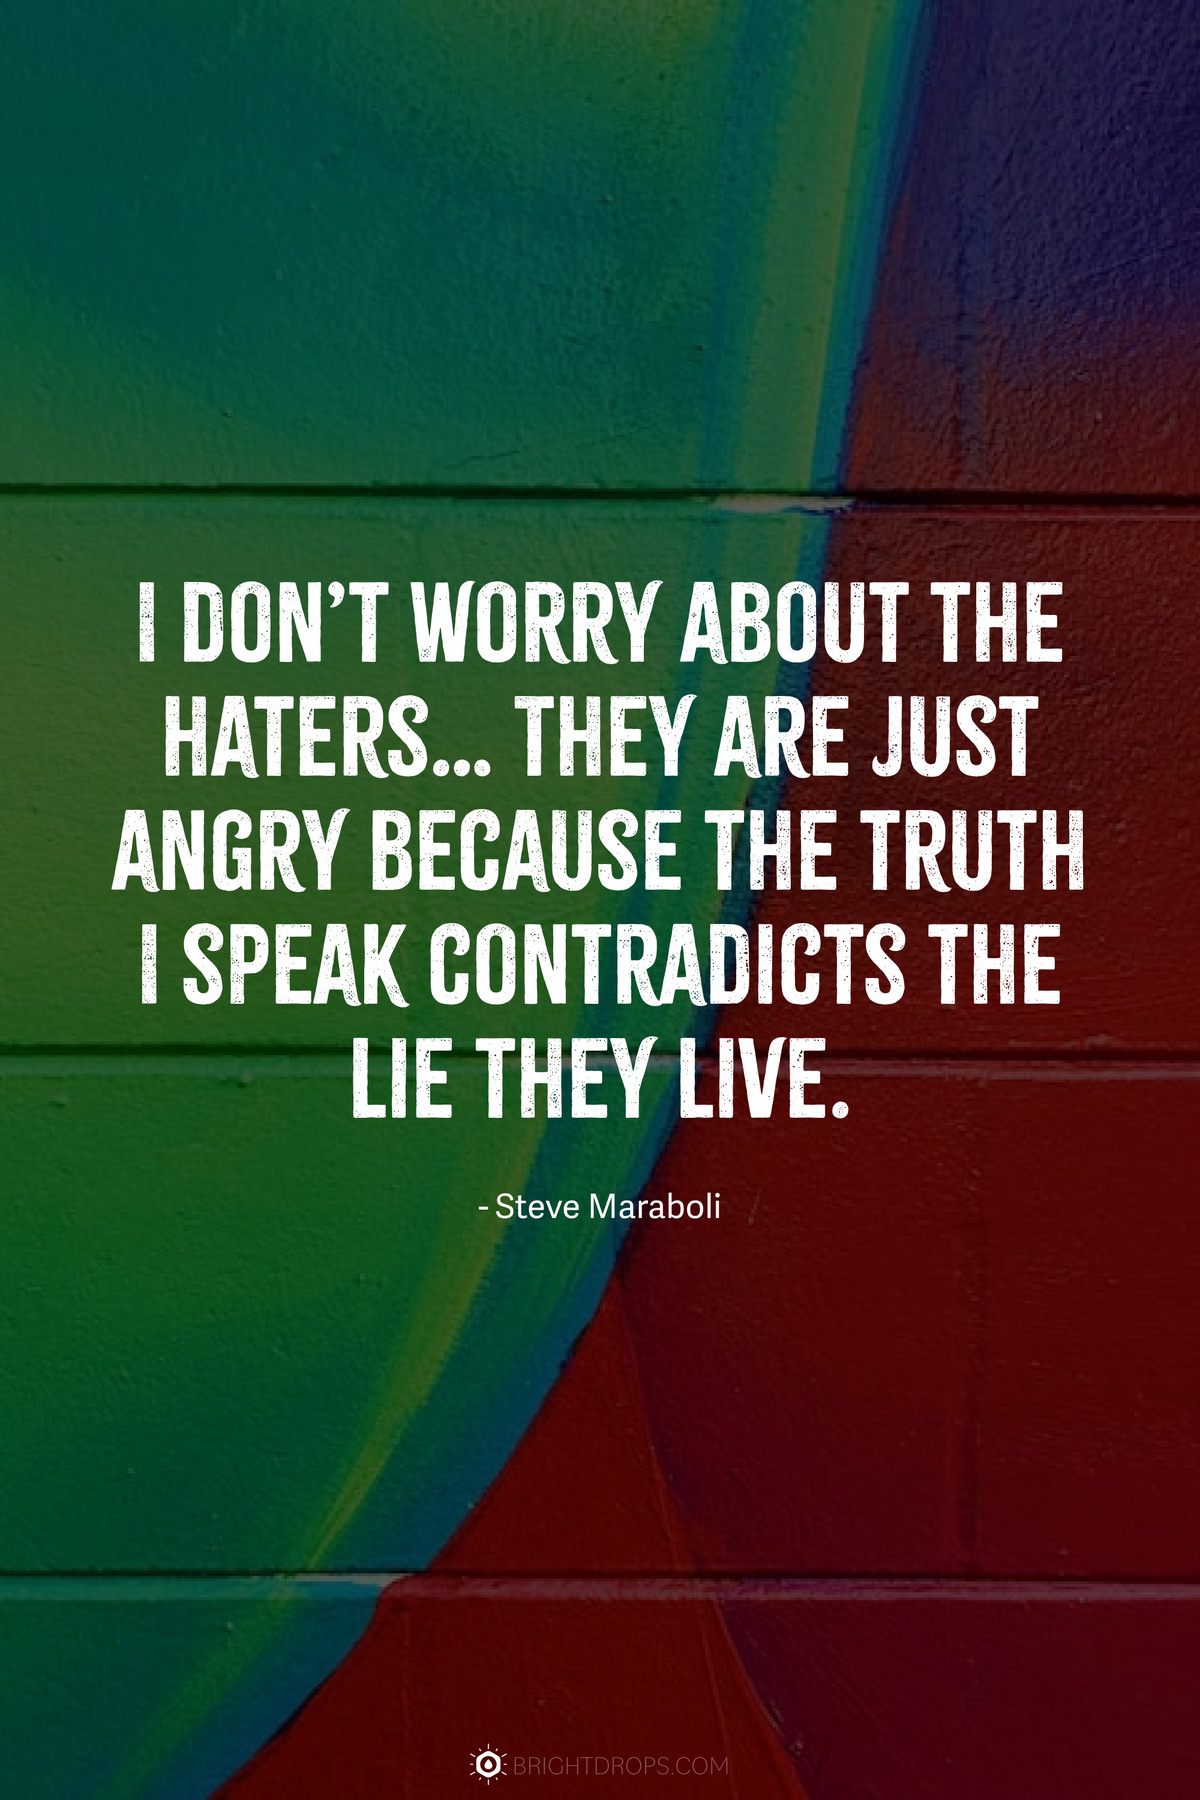 I don’t worry about the haters… They are just angry because the truth I speak contradicts the lie they live.